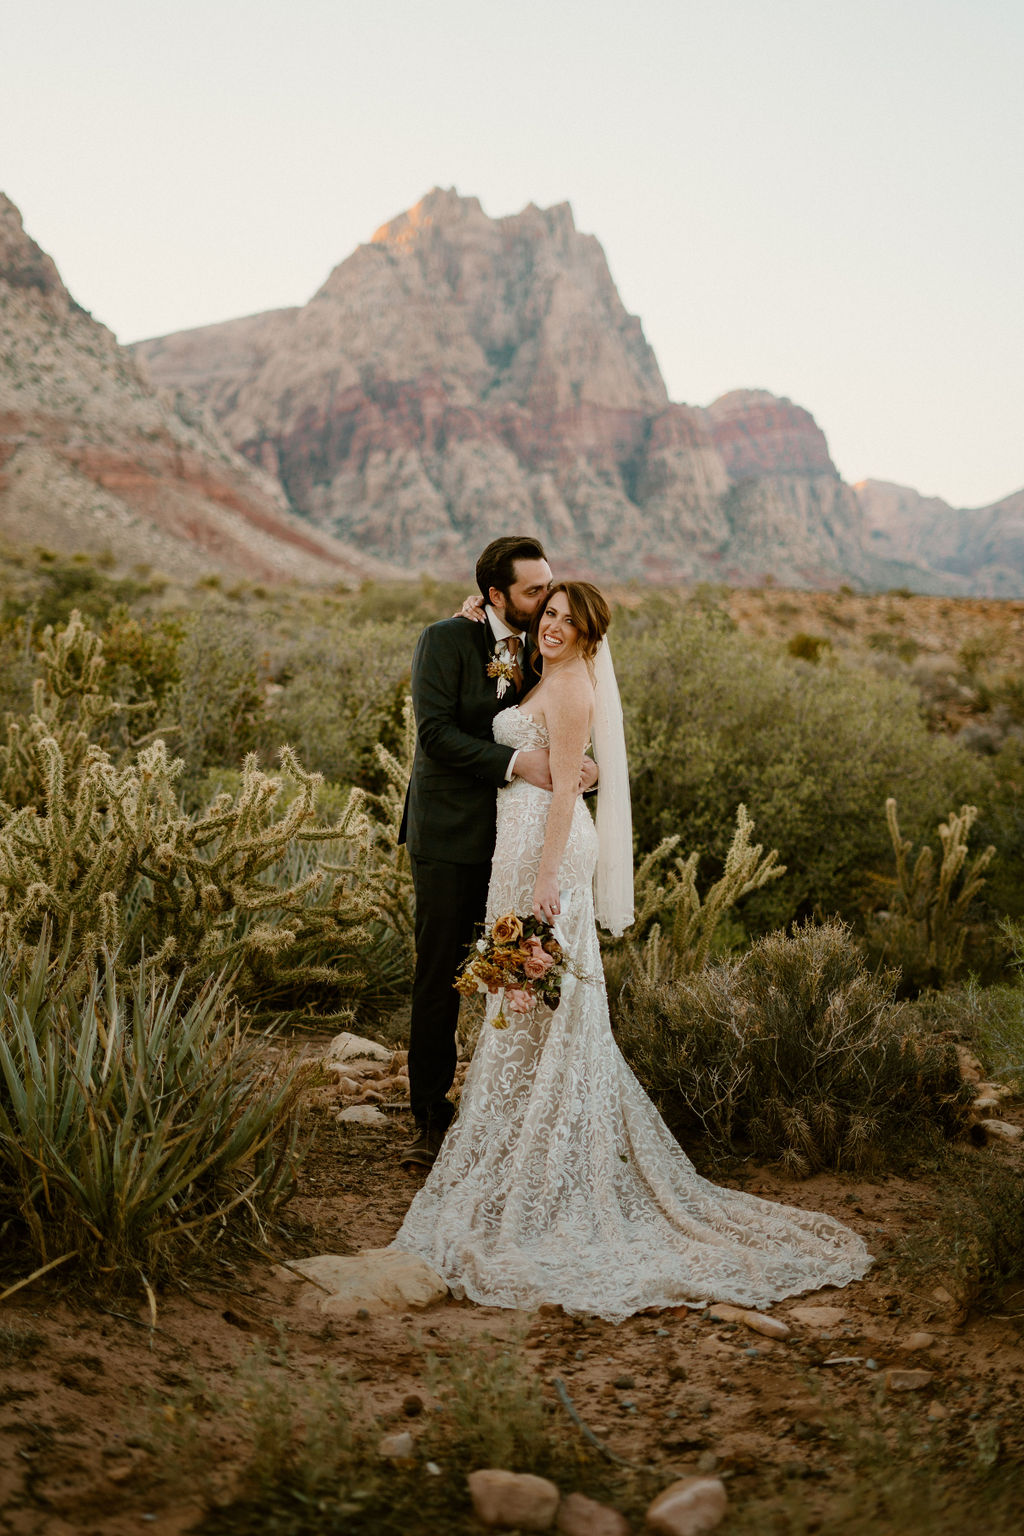 A bride and groom smiling and embracing in a desert landscape with rocky mountains in the background.